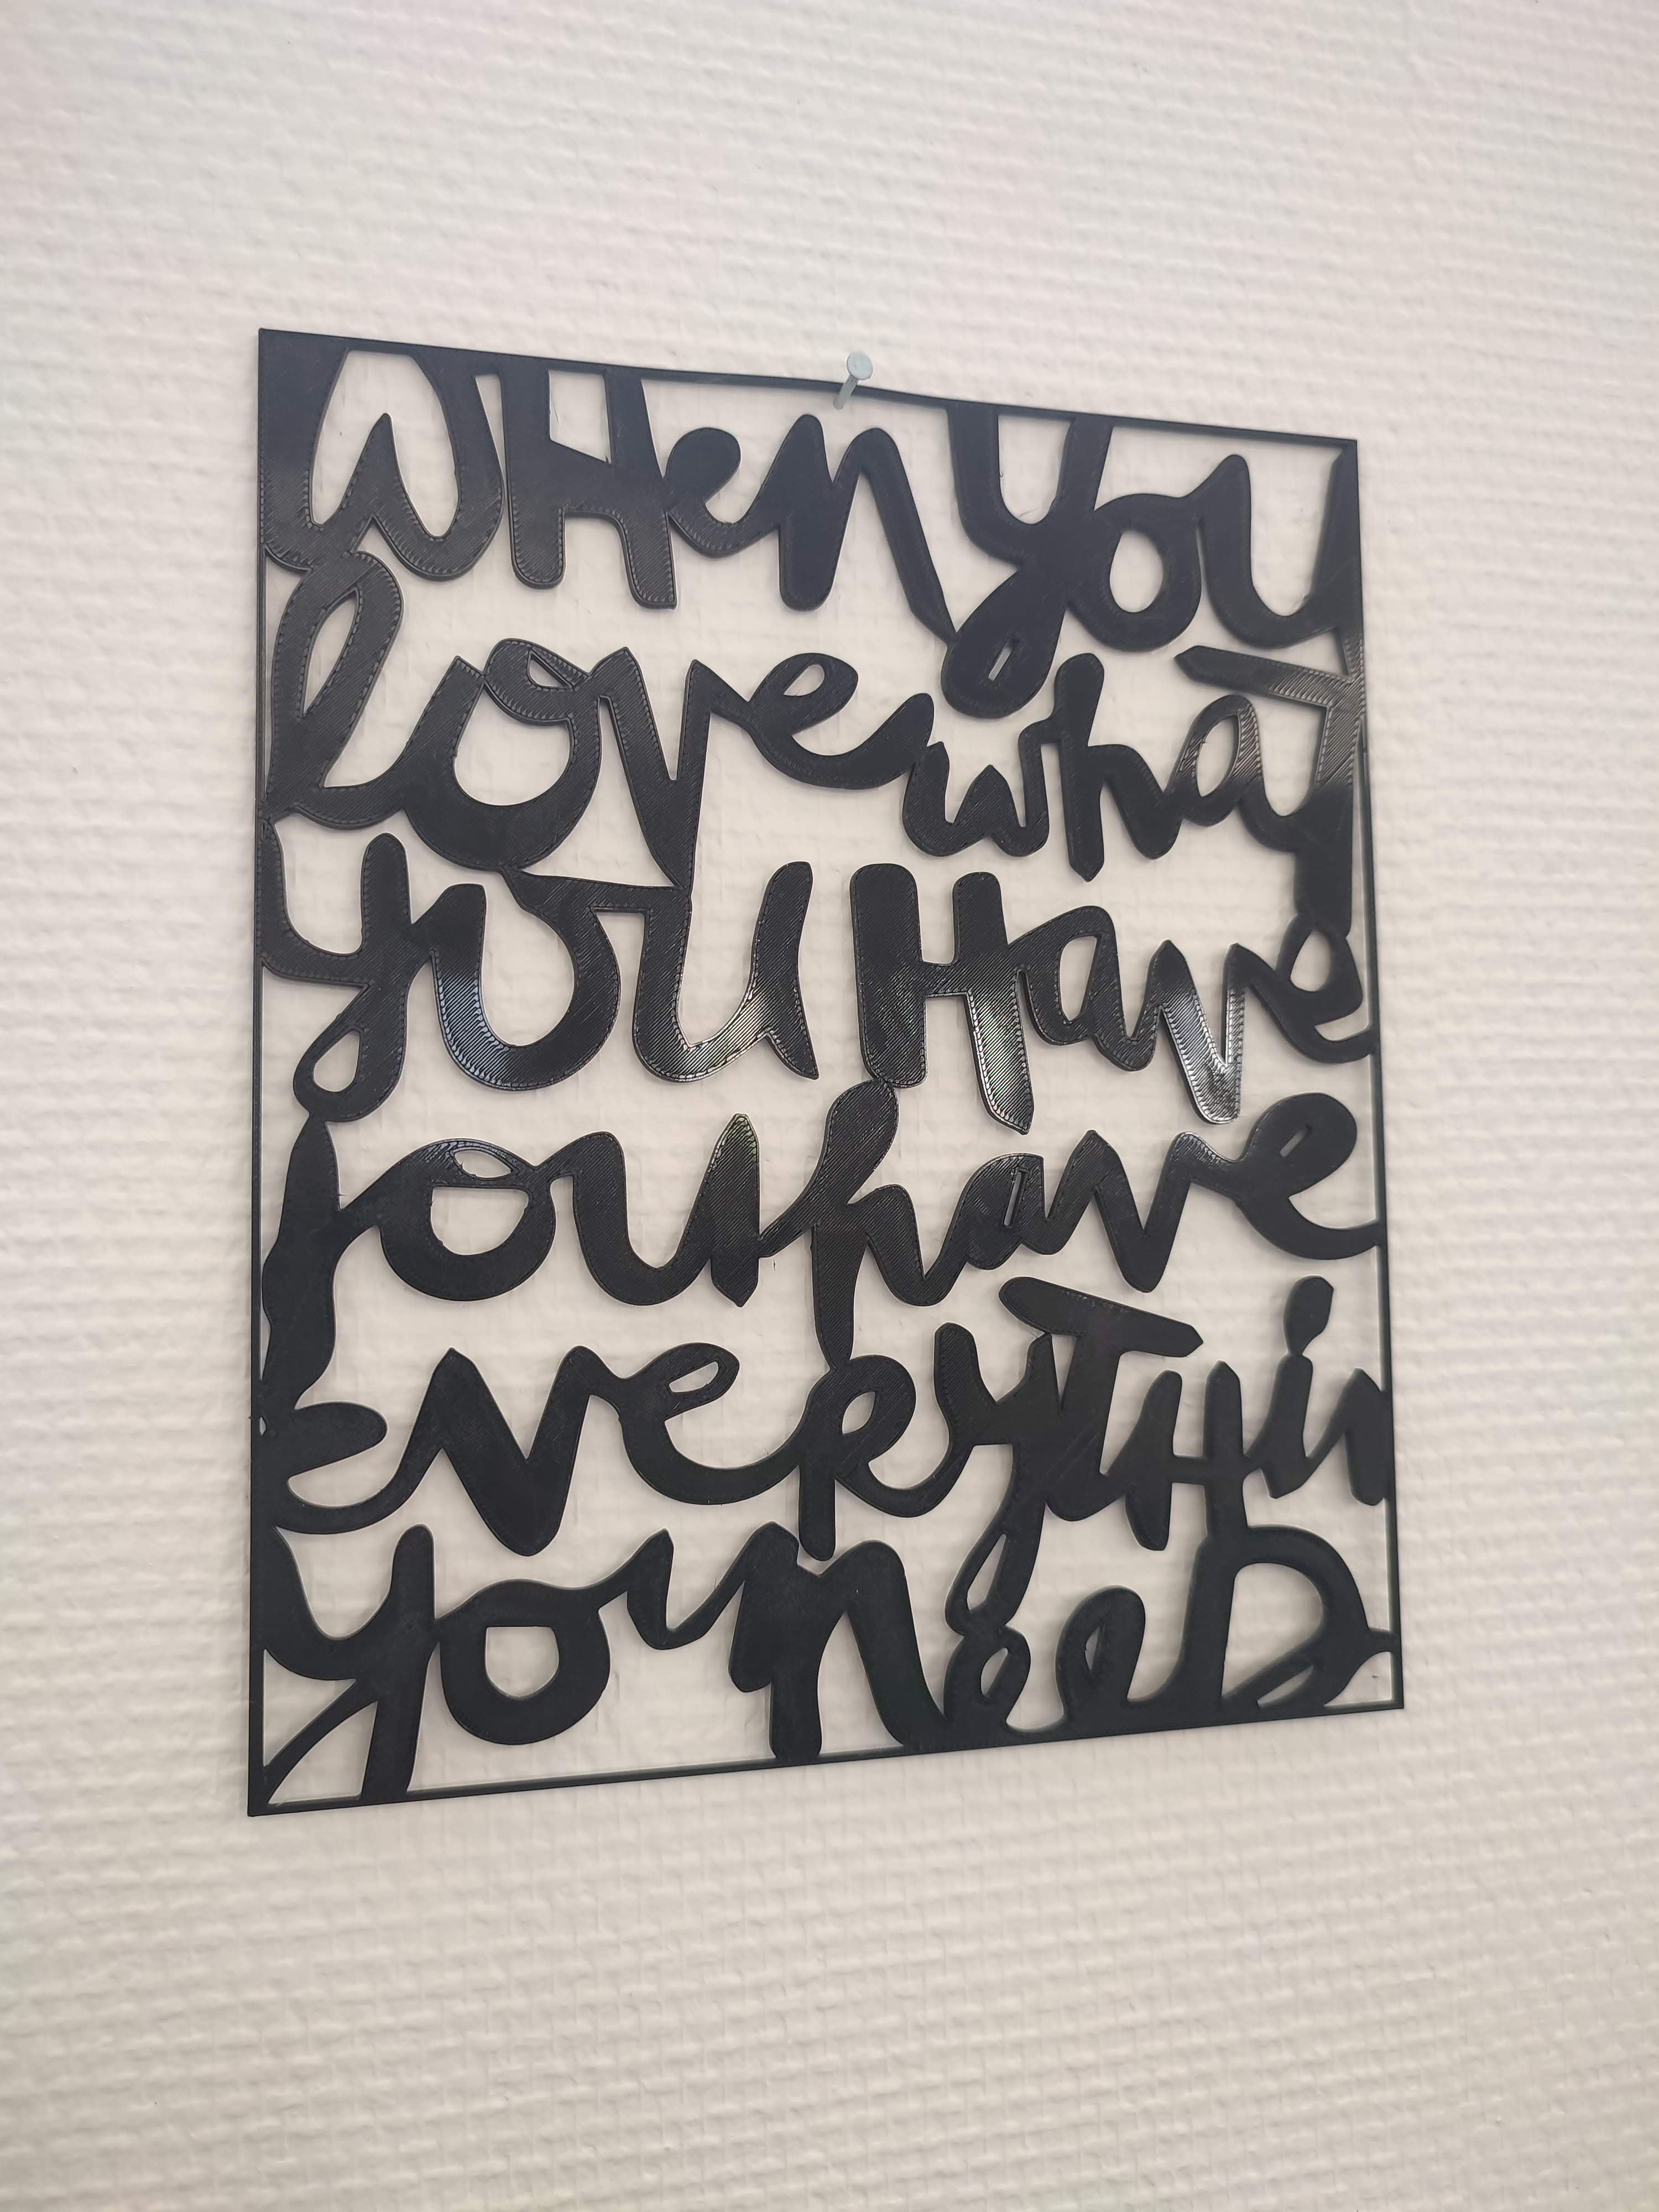 When you love what you have... (Wall art)